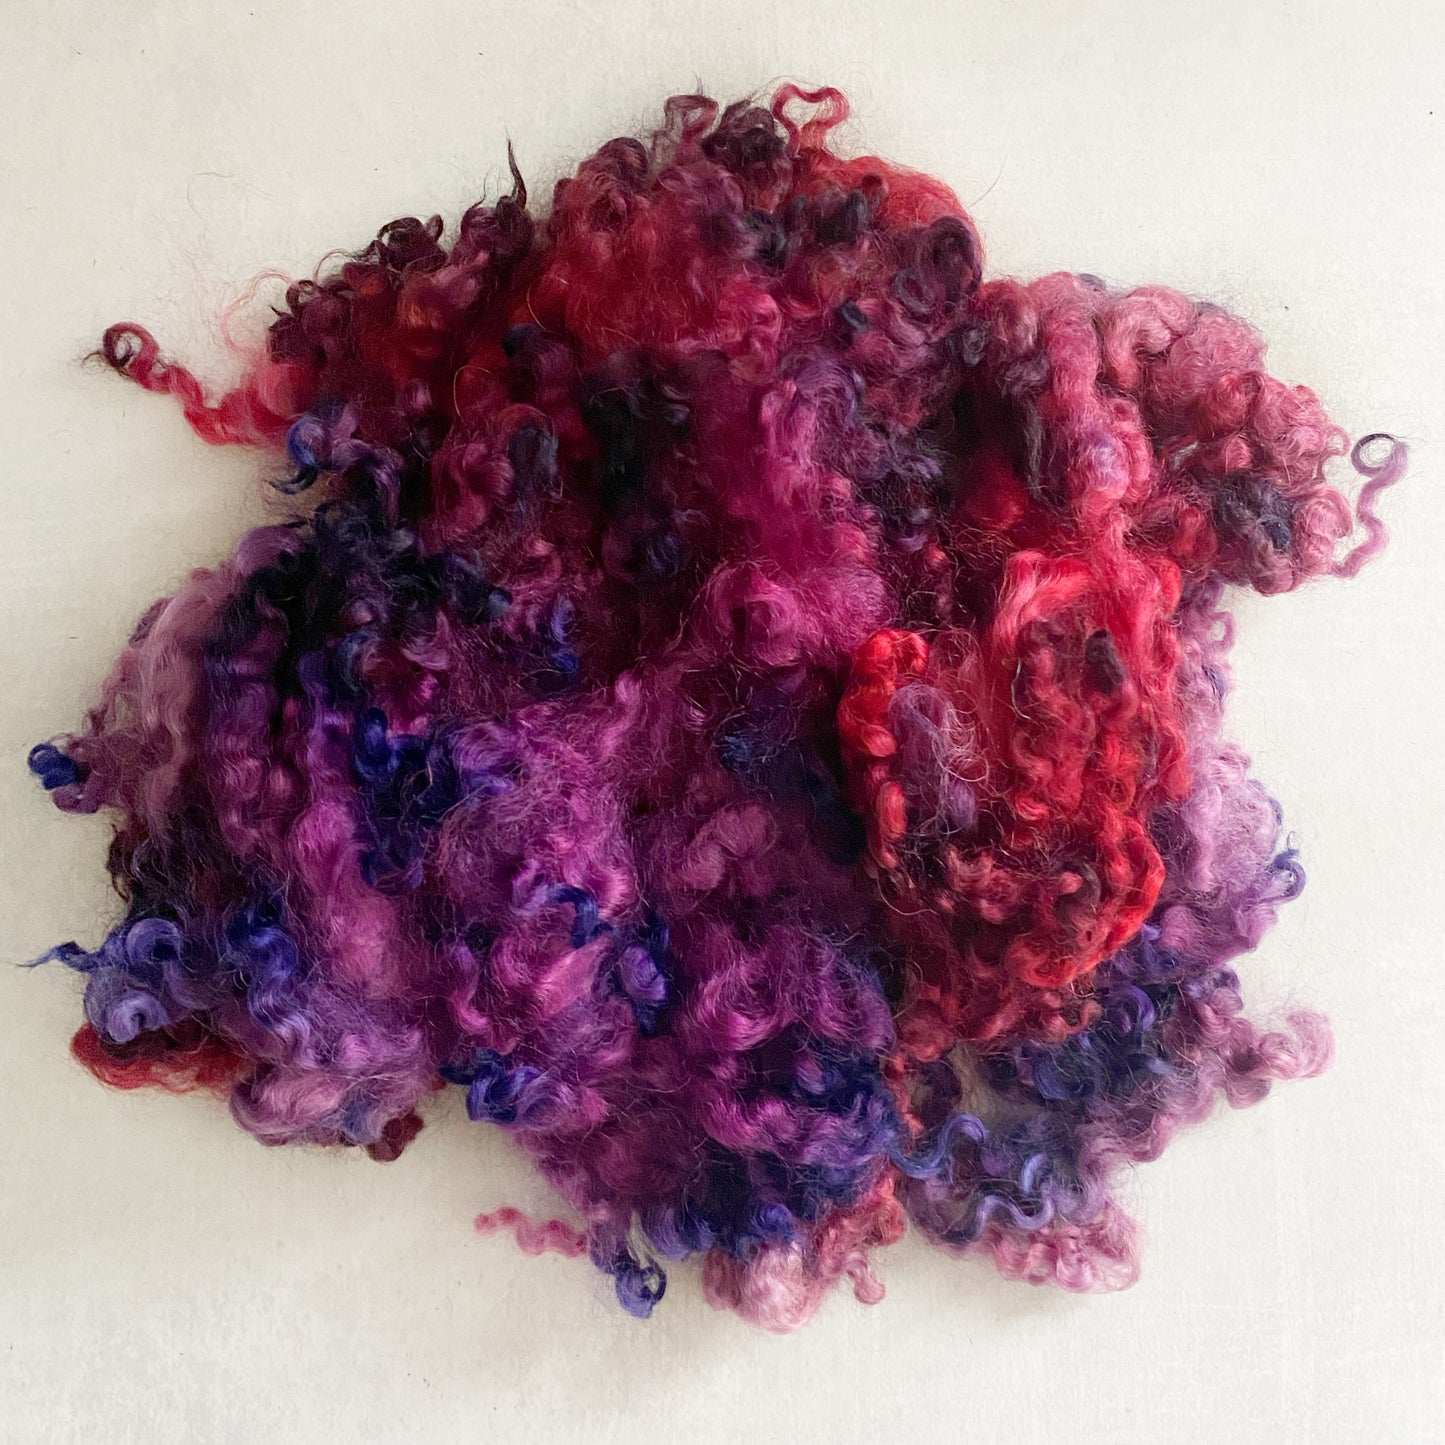 Dyed Border Leicester Cloud - IO